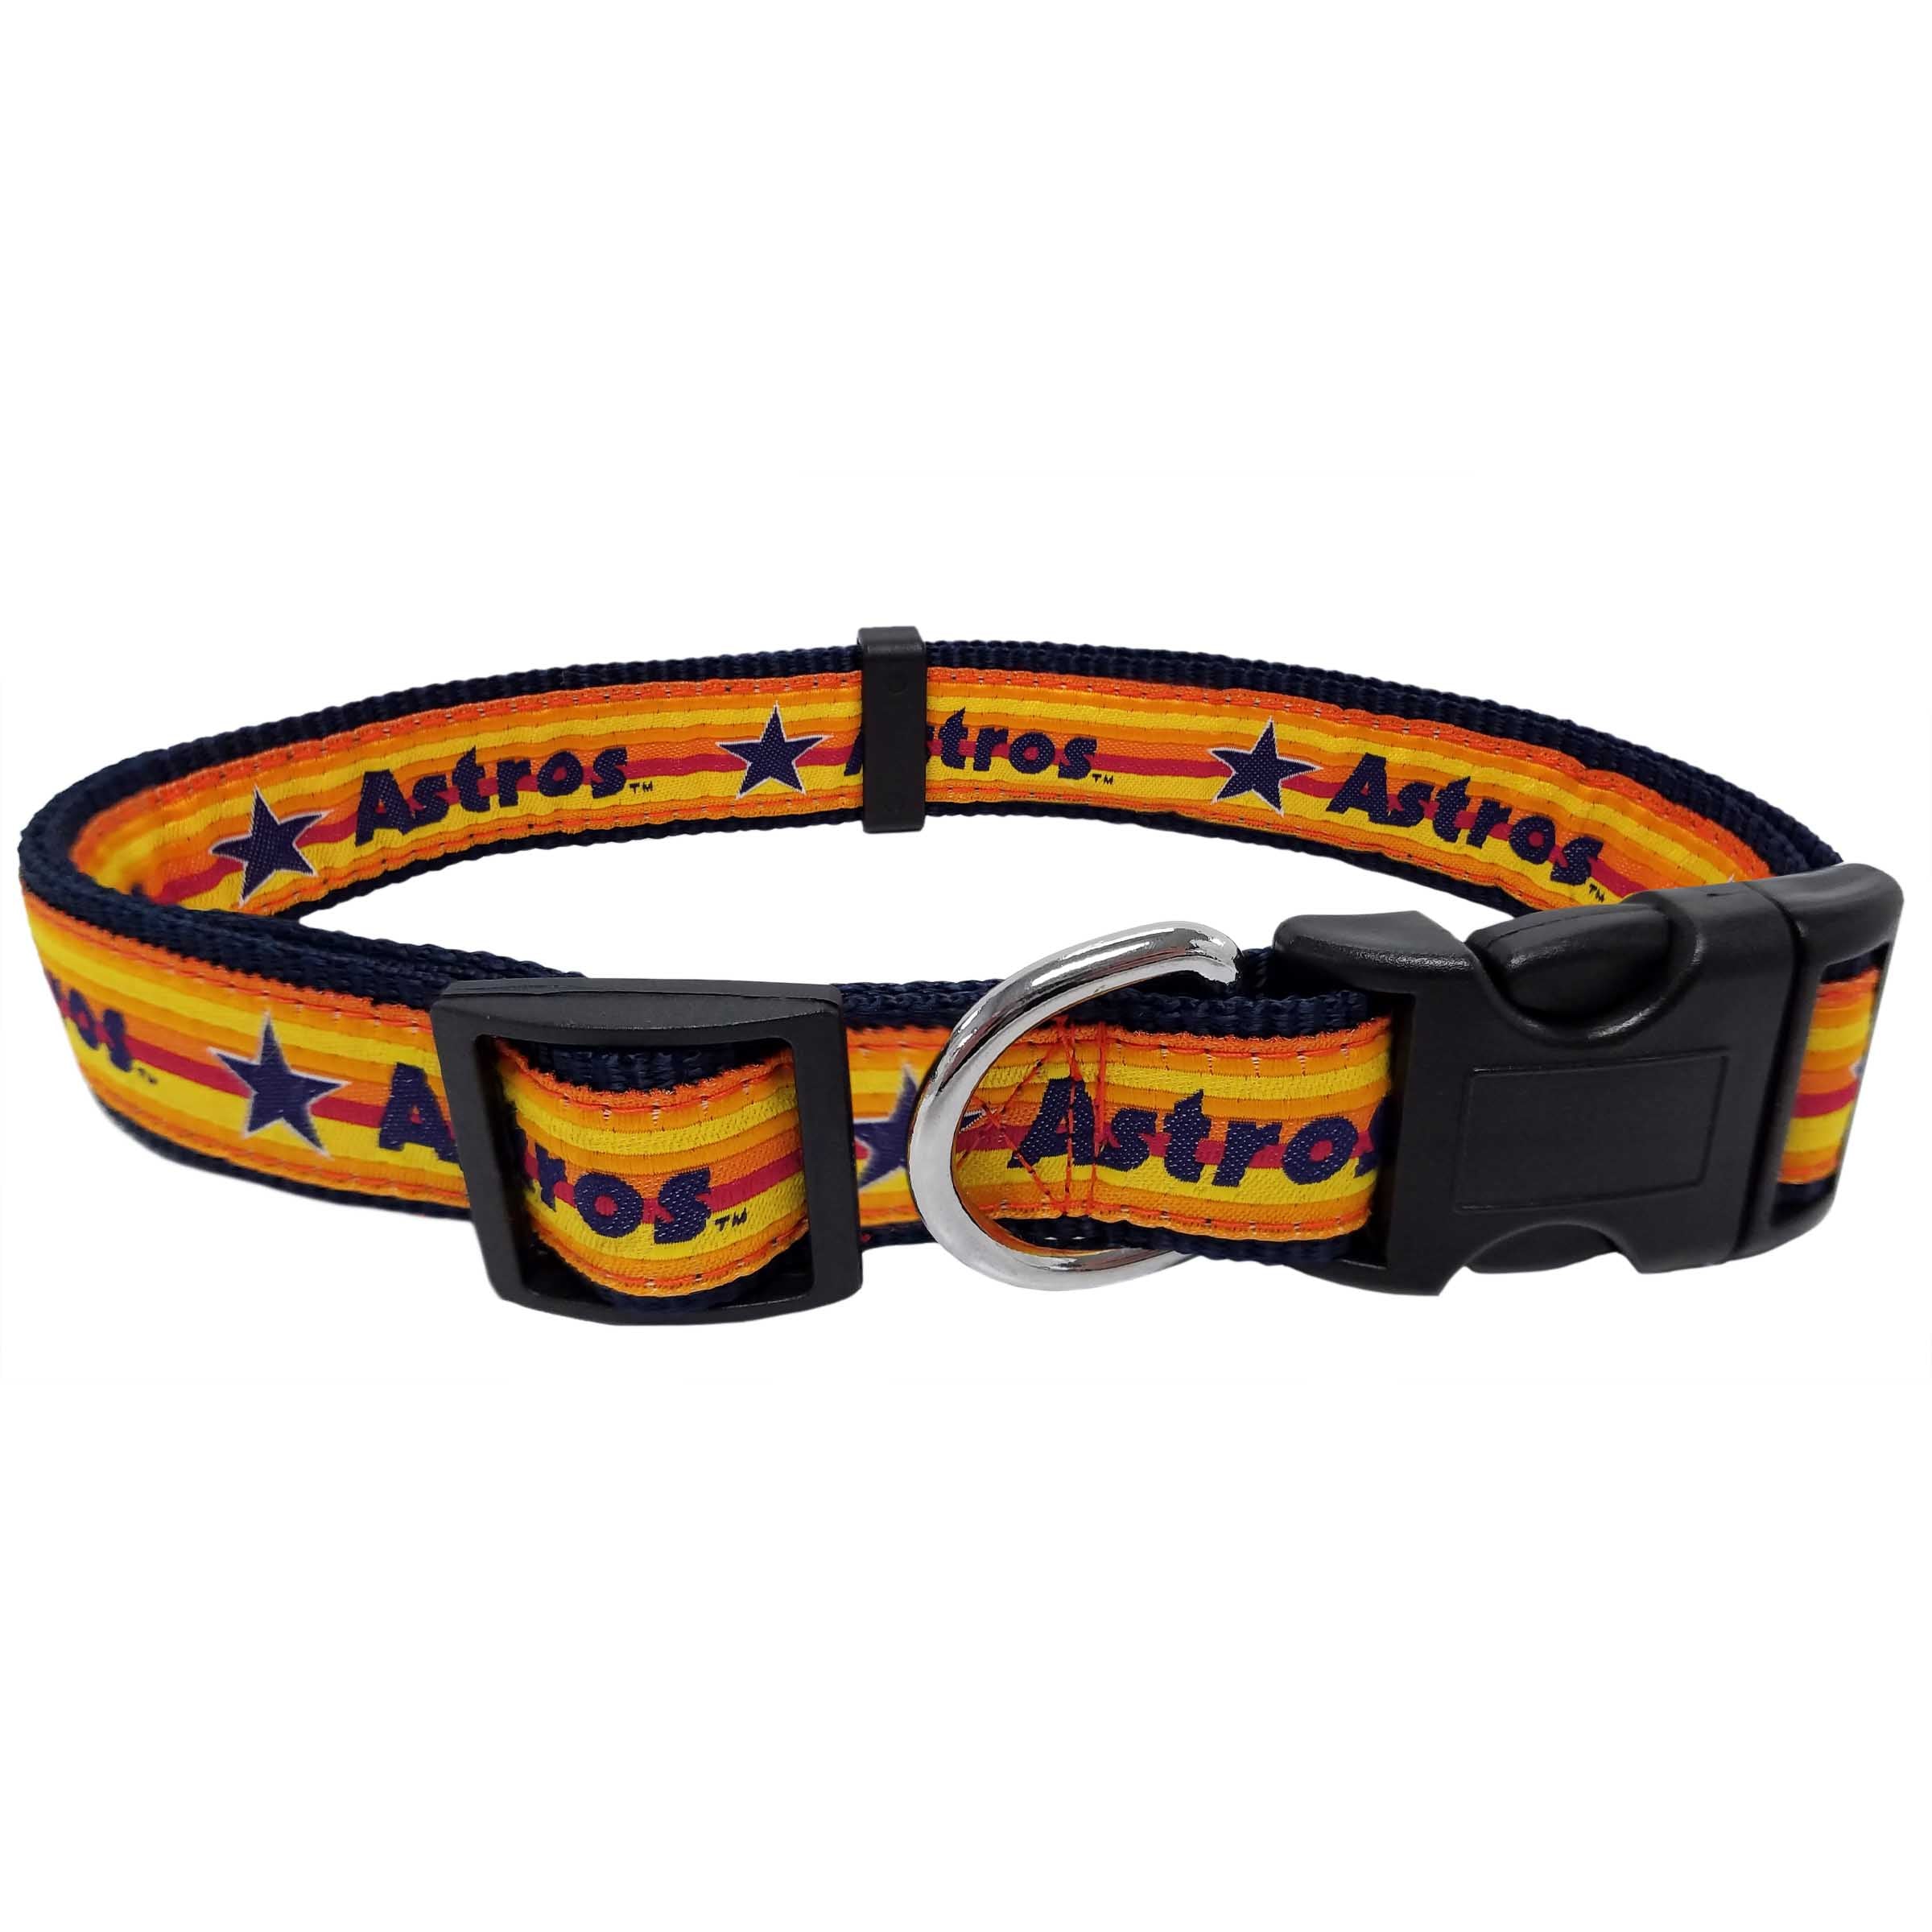 astros gear for dogs